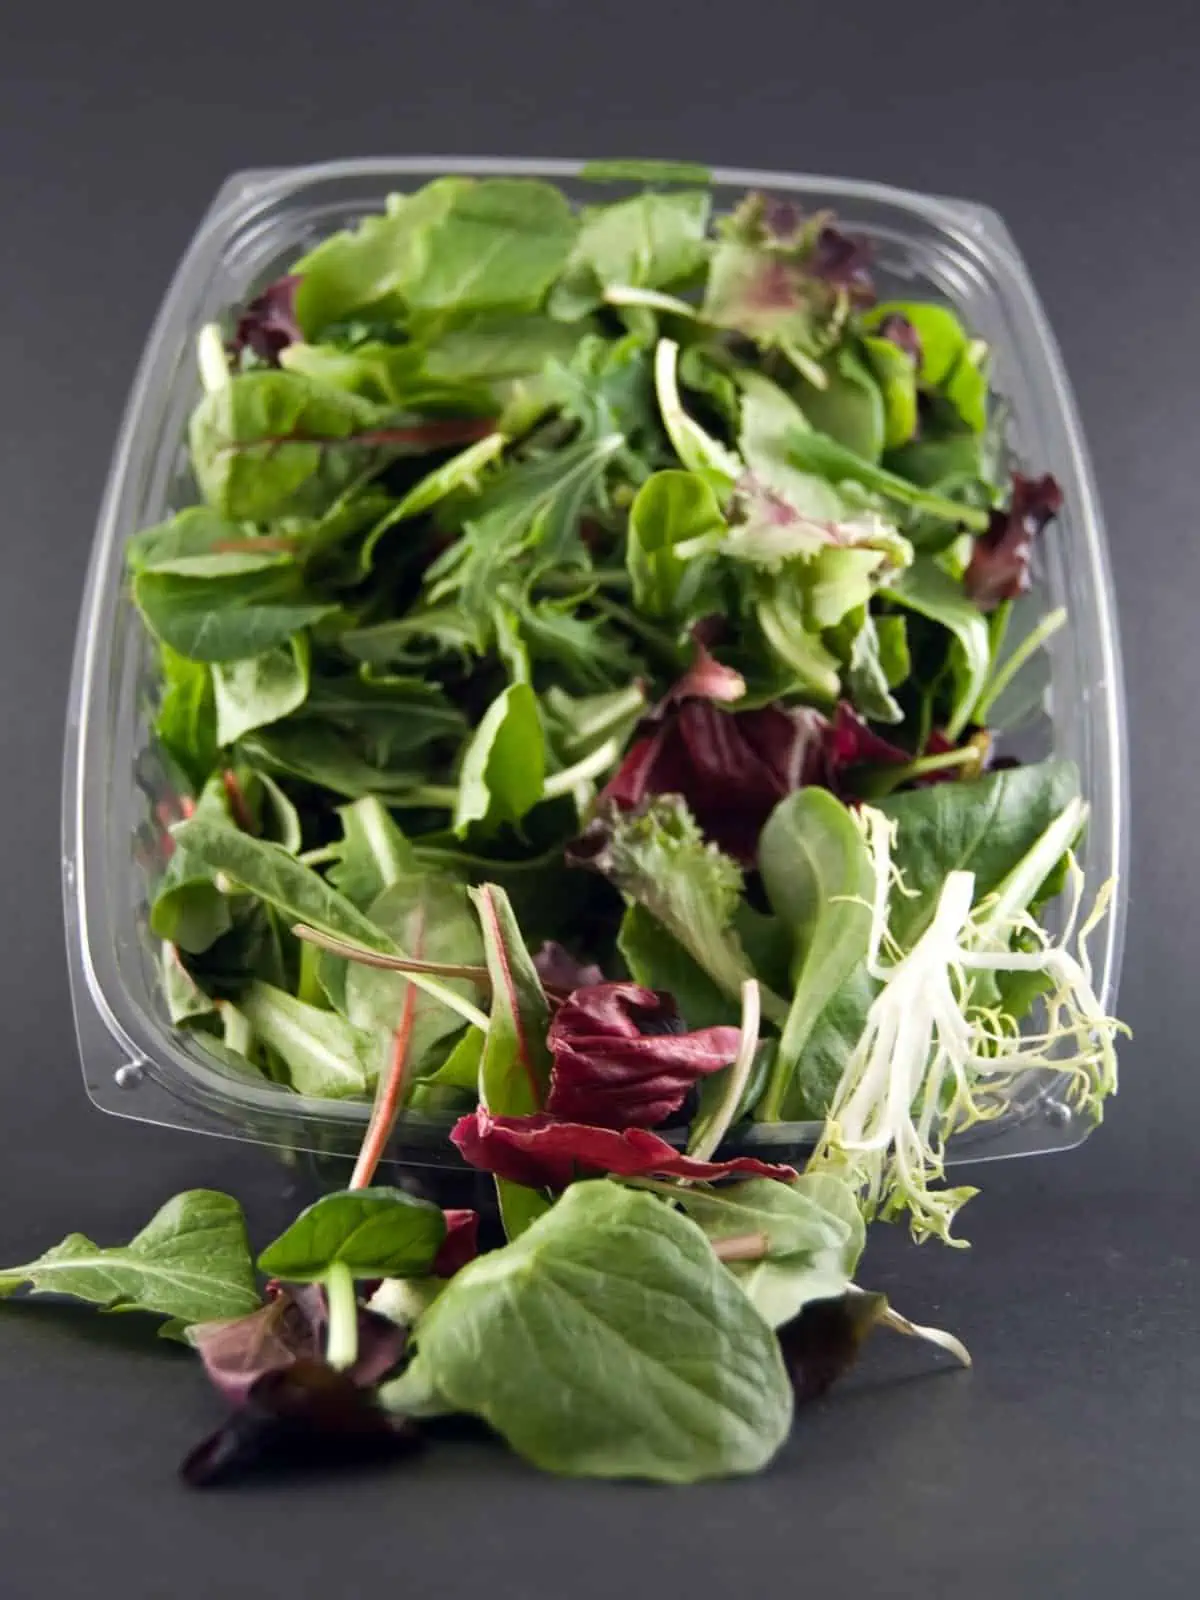 Pre packed salad leaves In plastic container